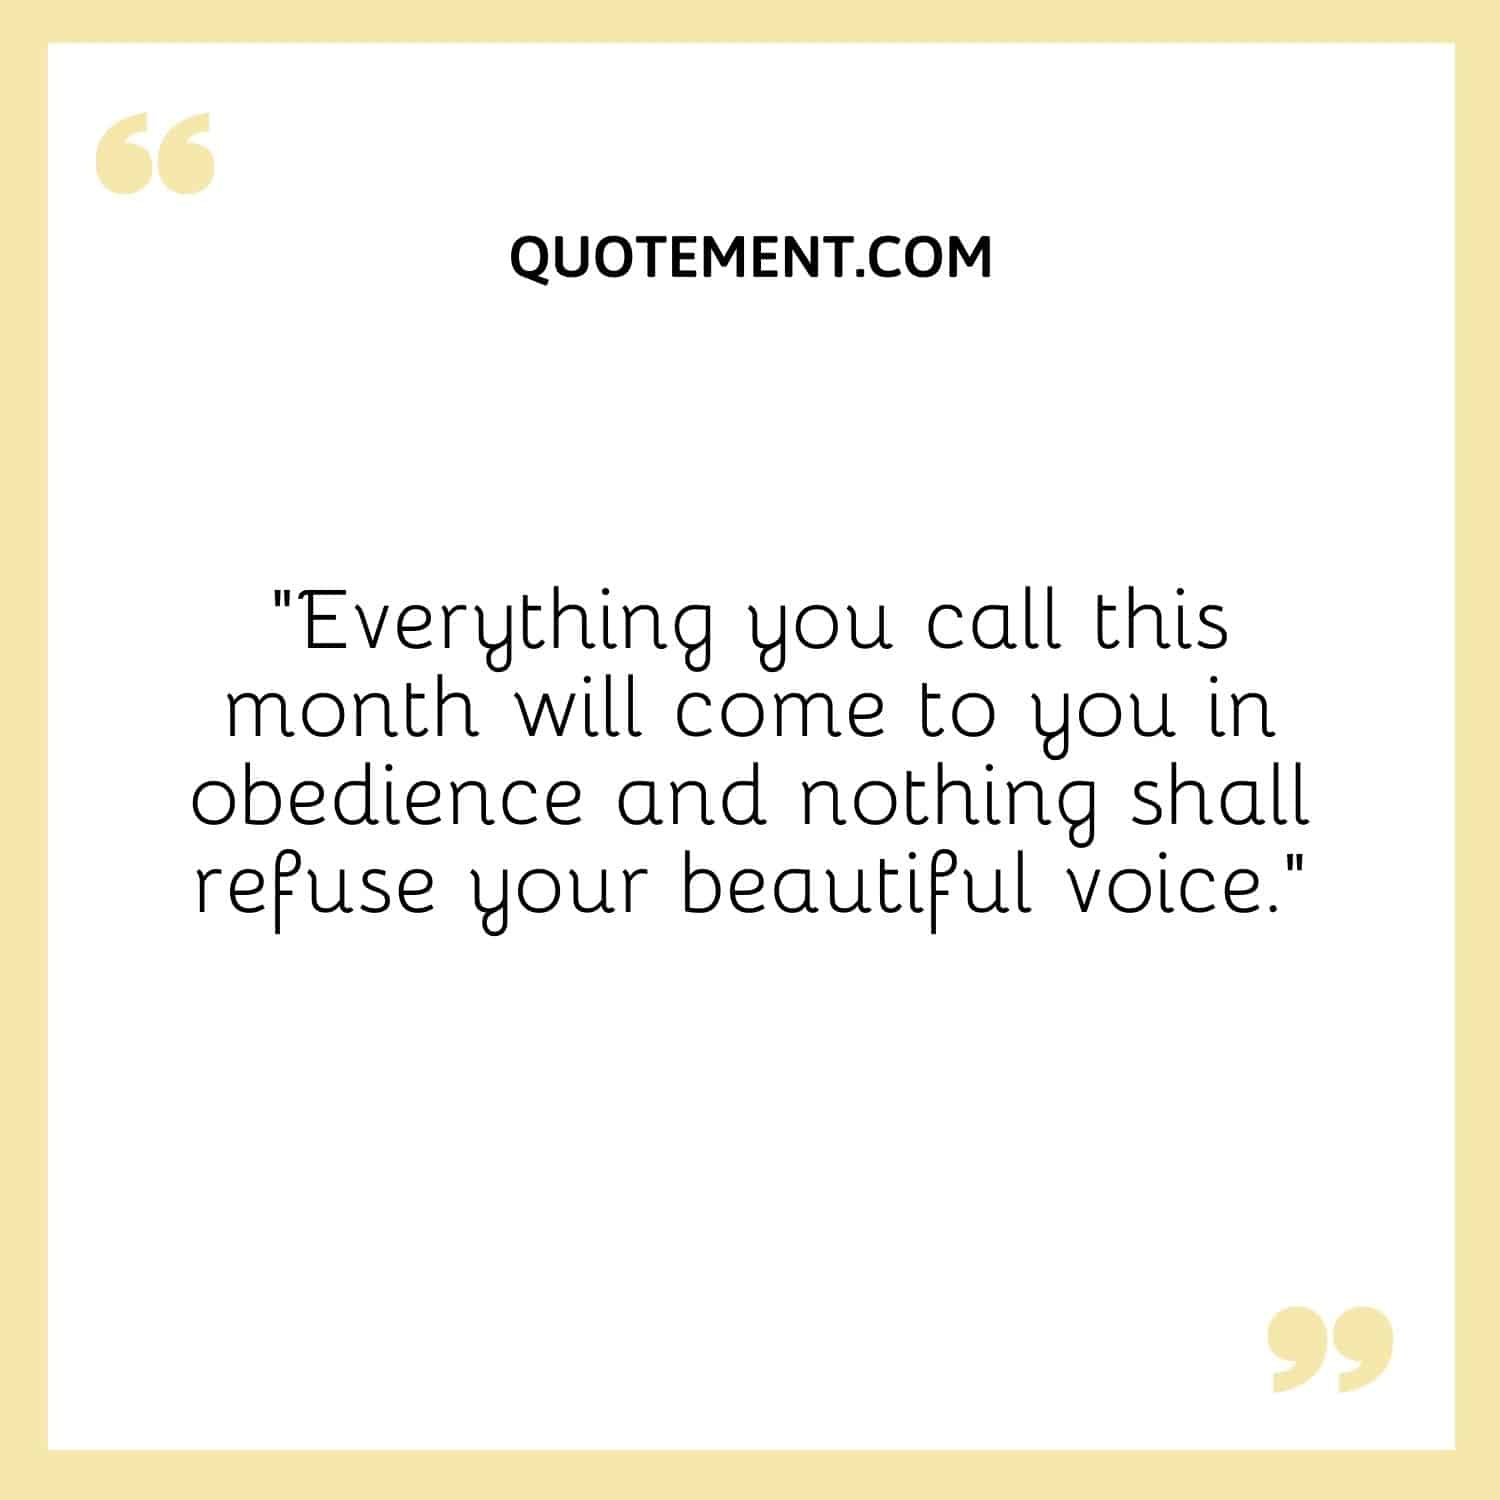 Everything you call this month will come to you in obedience and nothing shall refuse your beautiful voice